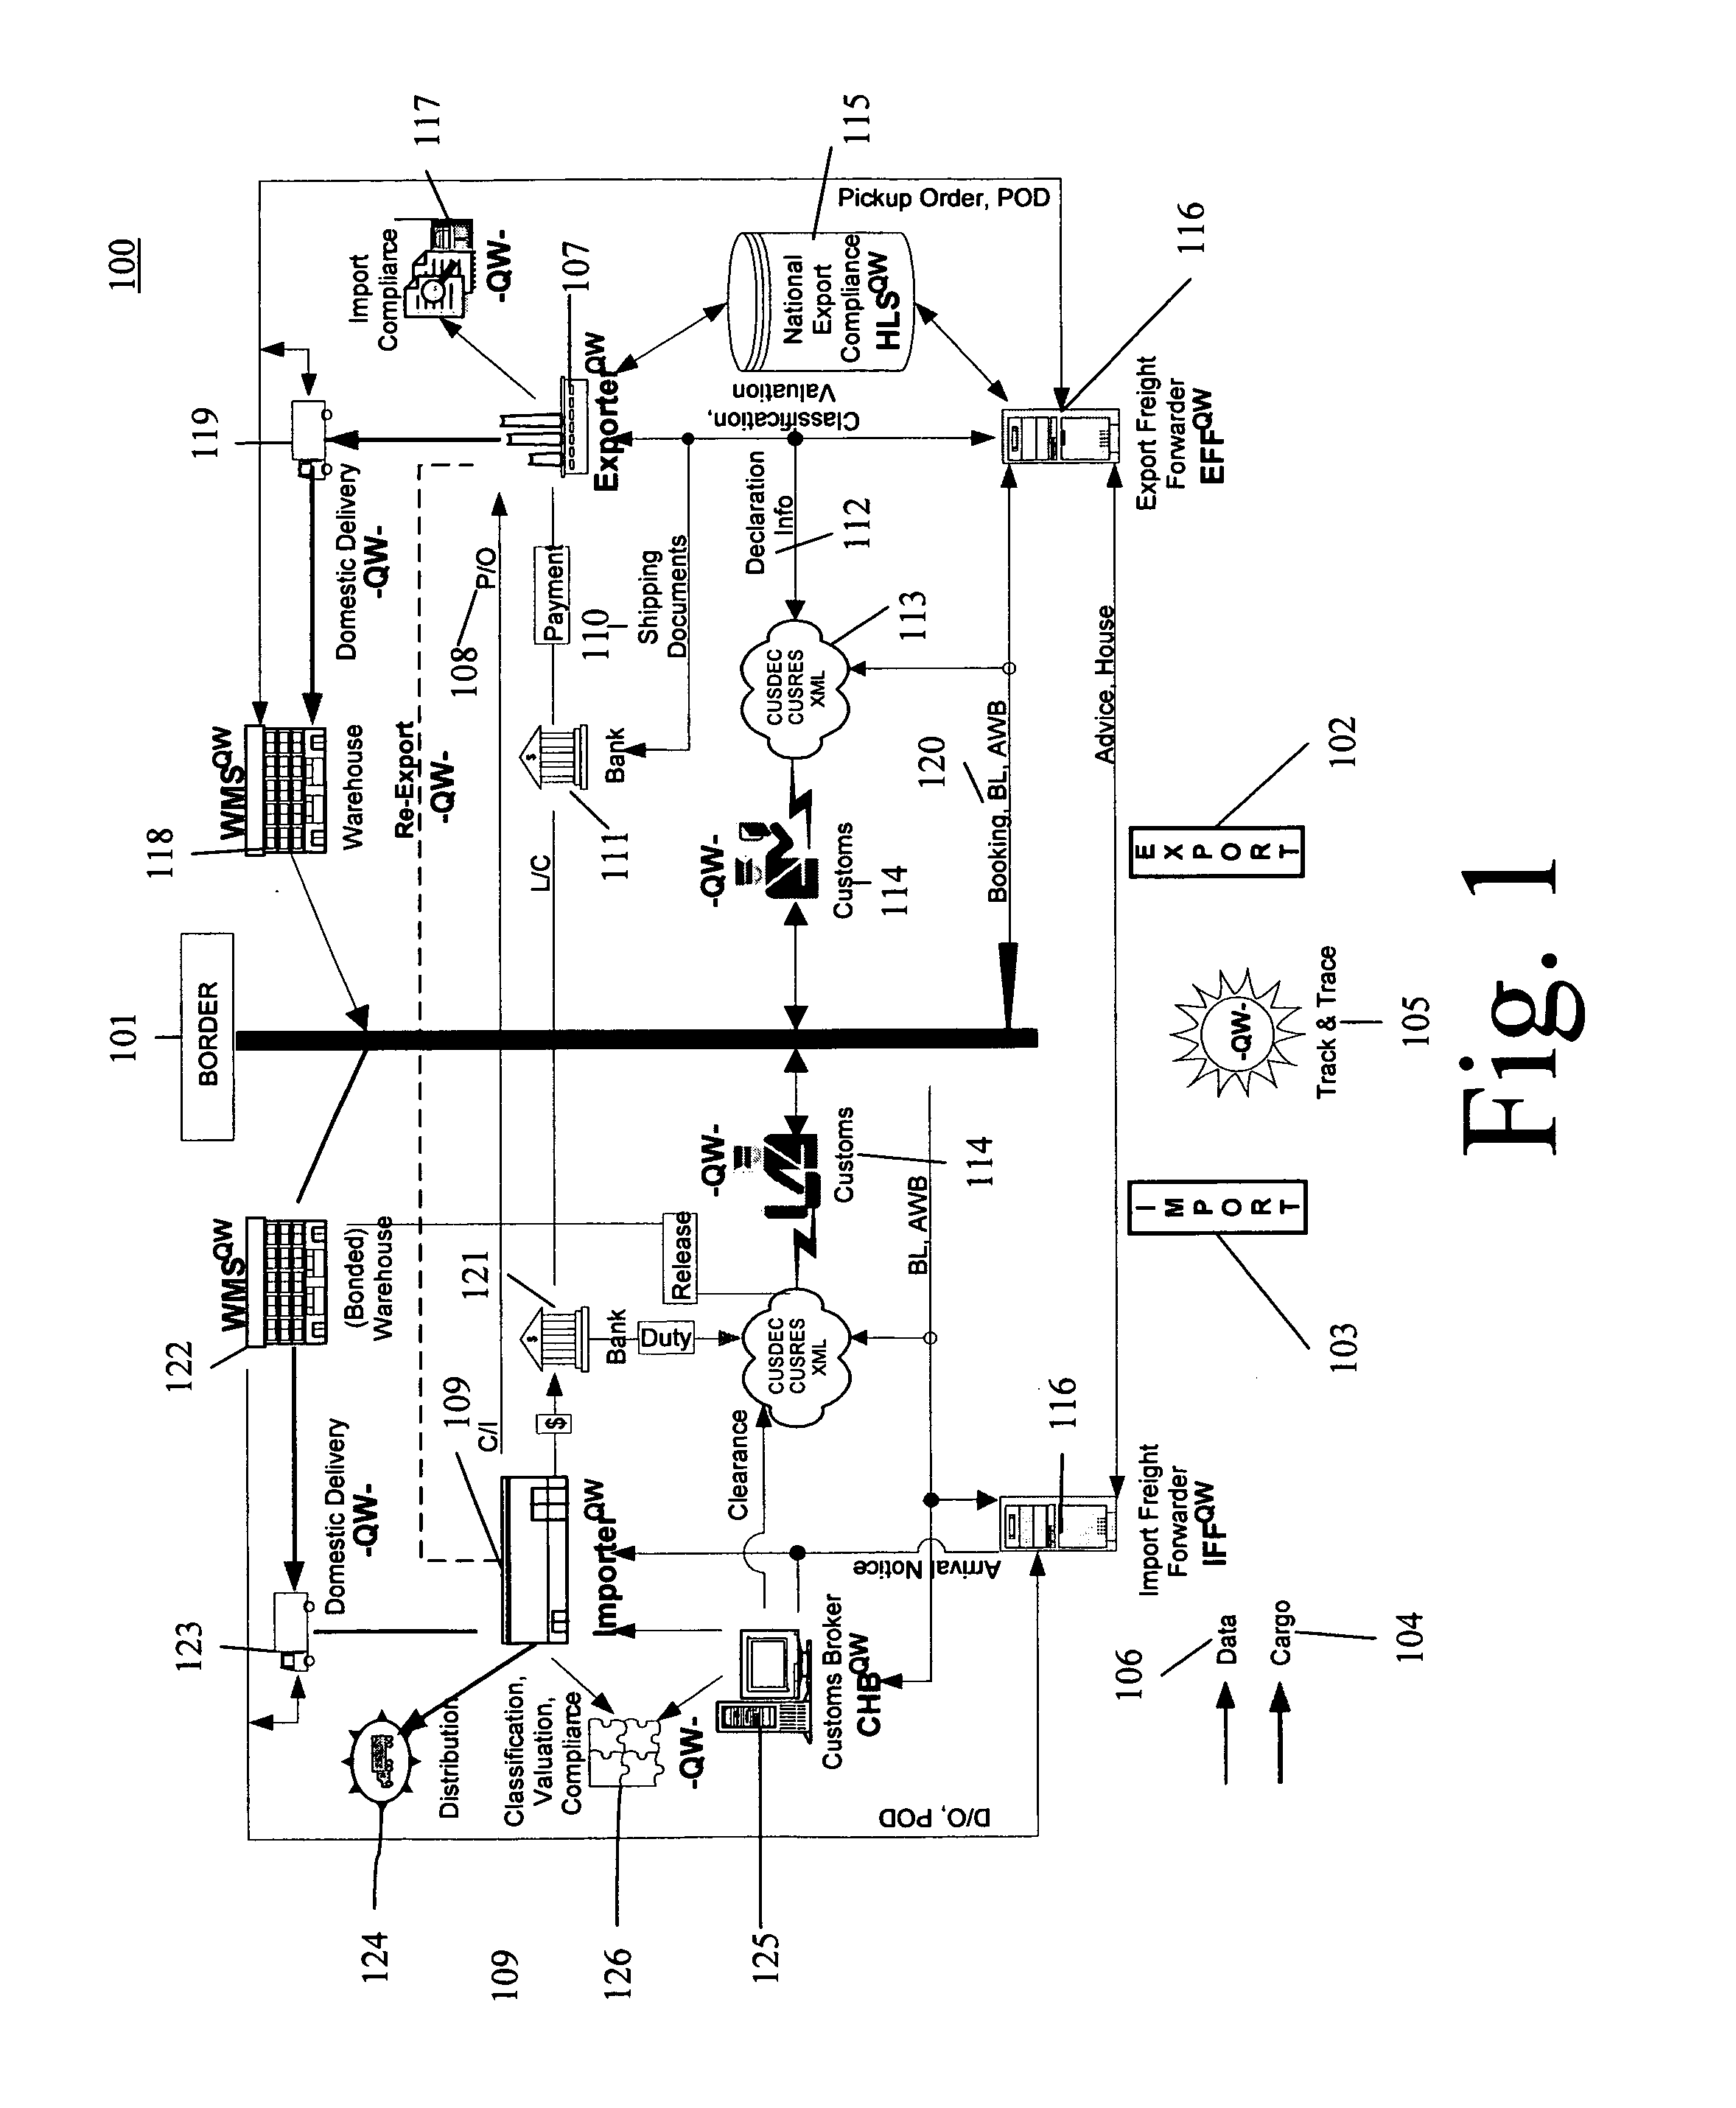 Method and system for managing multi-national integrated trade and logistics and processes for efficient, timely, and compliant movement of goods across international borders